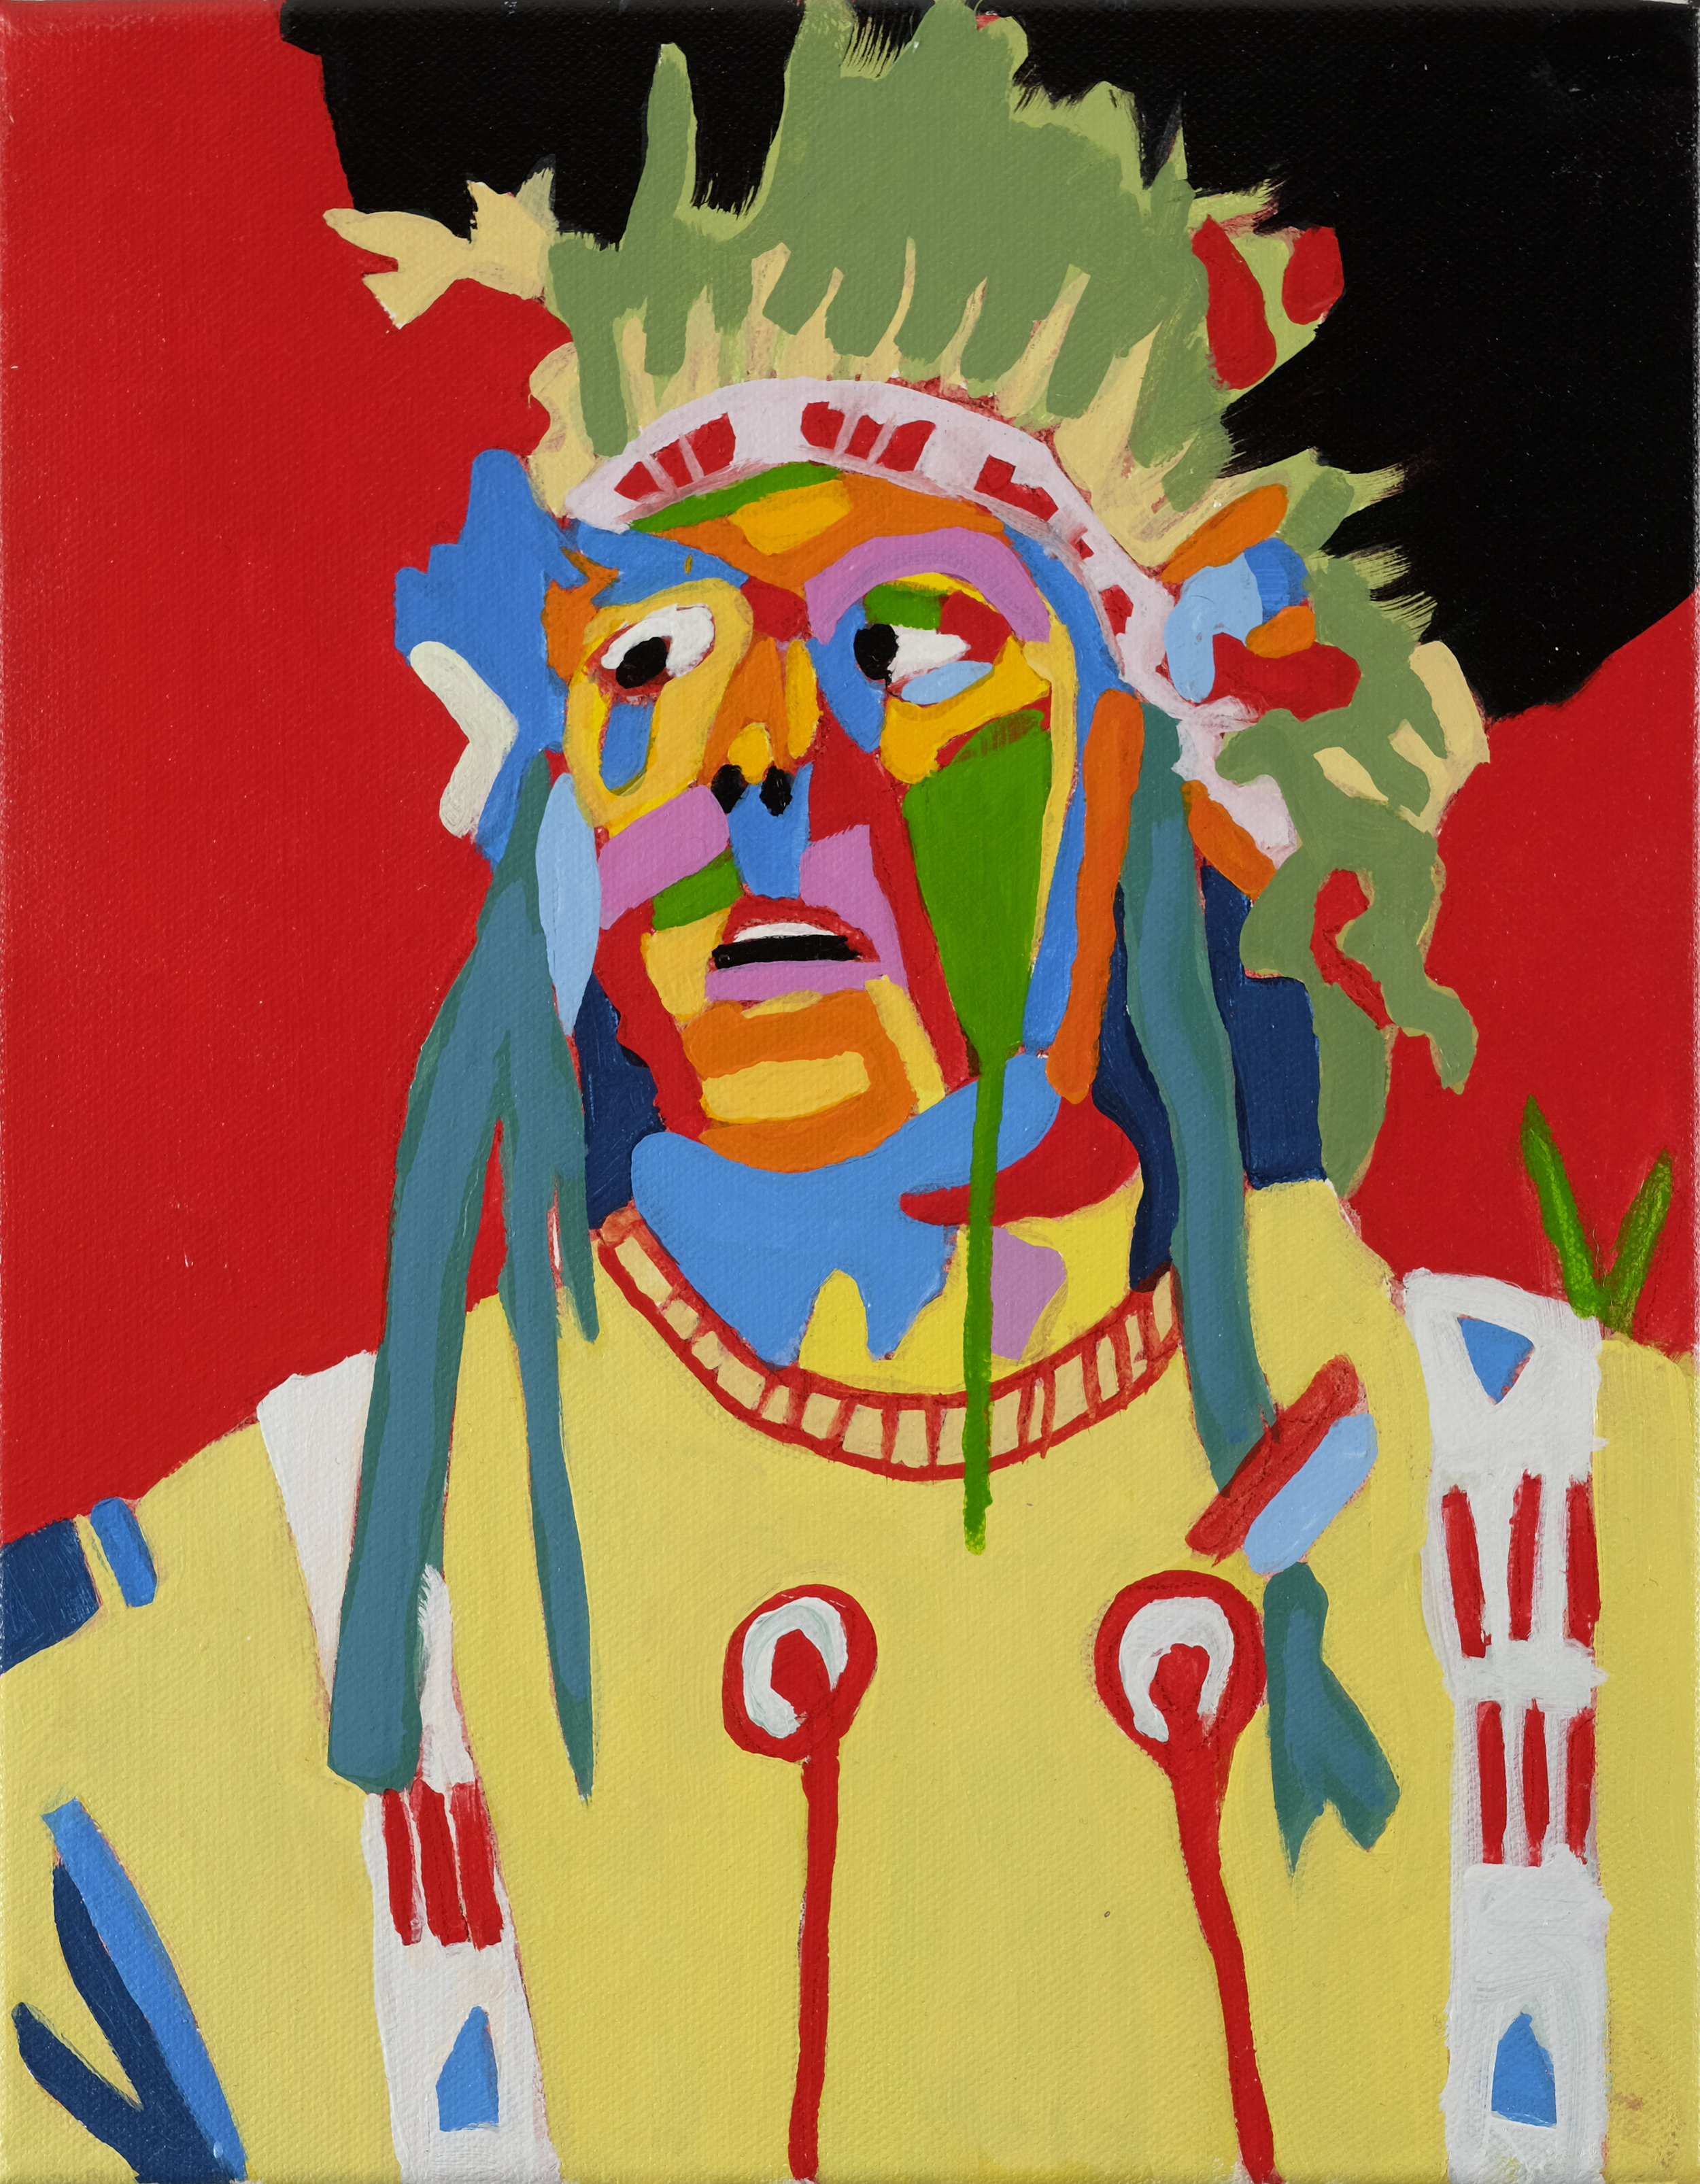   Desi Arnaz in the Hollywood Plains Indian Kit    Acrylic on canvas, 12x10 inches 